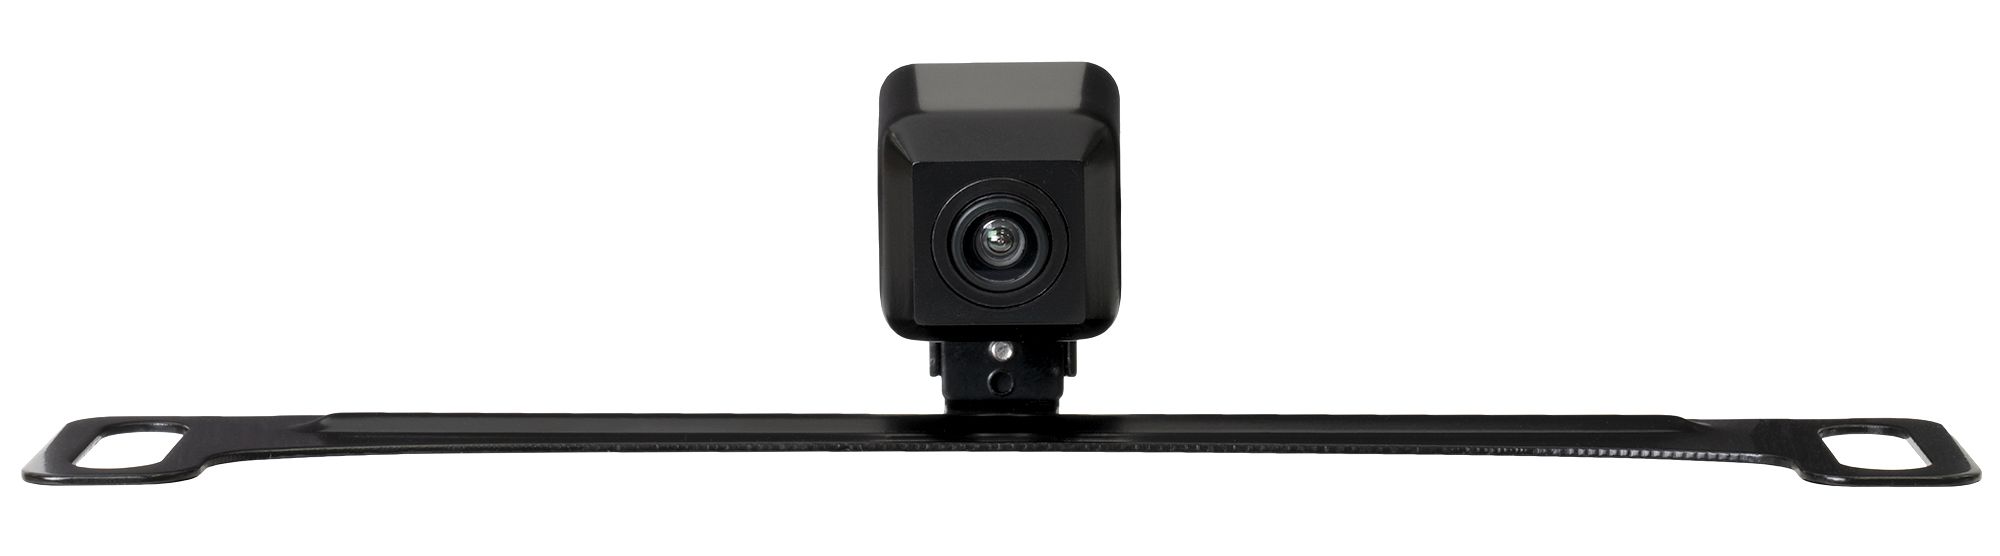 XC4N1 170° 4-in-1 Universal Rearview Backup Camera with Four Mounting Options